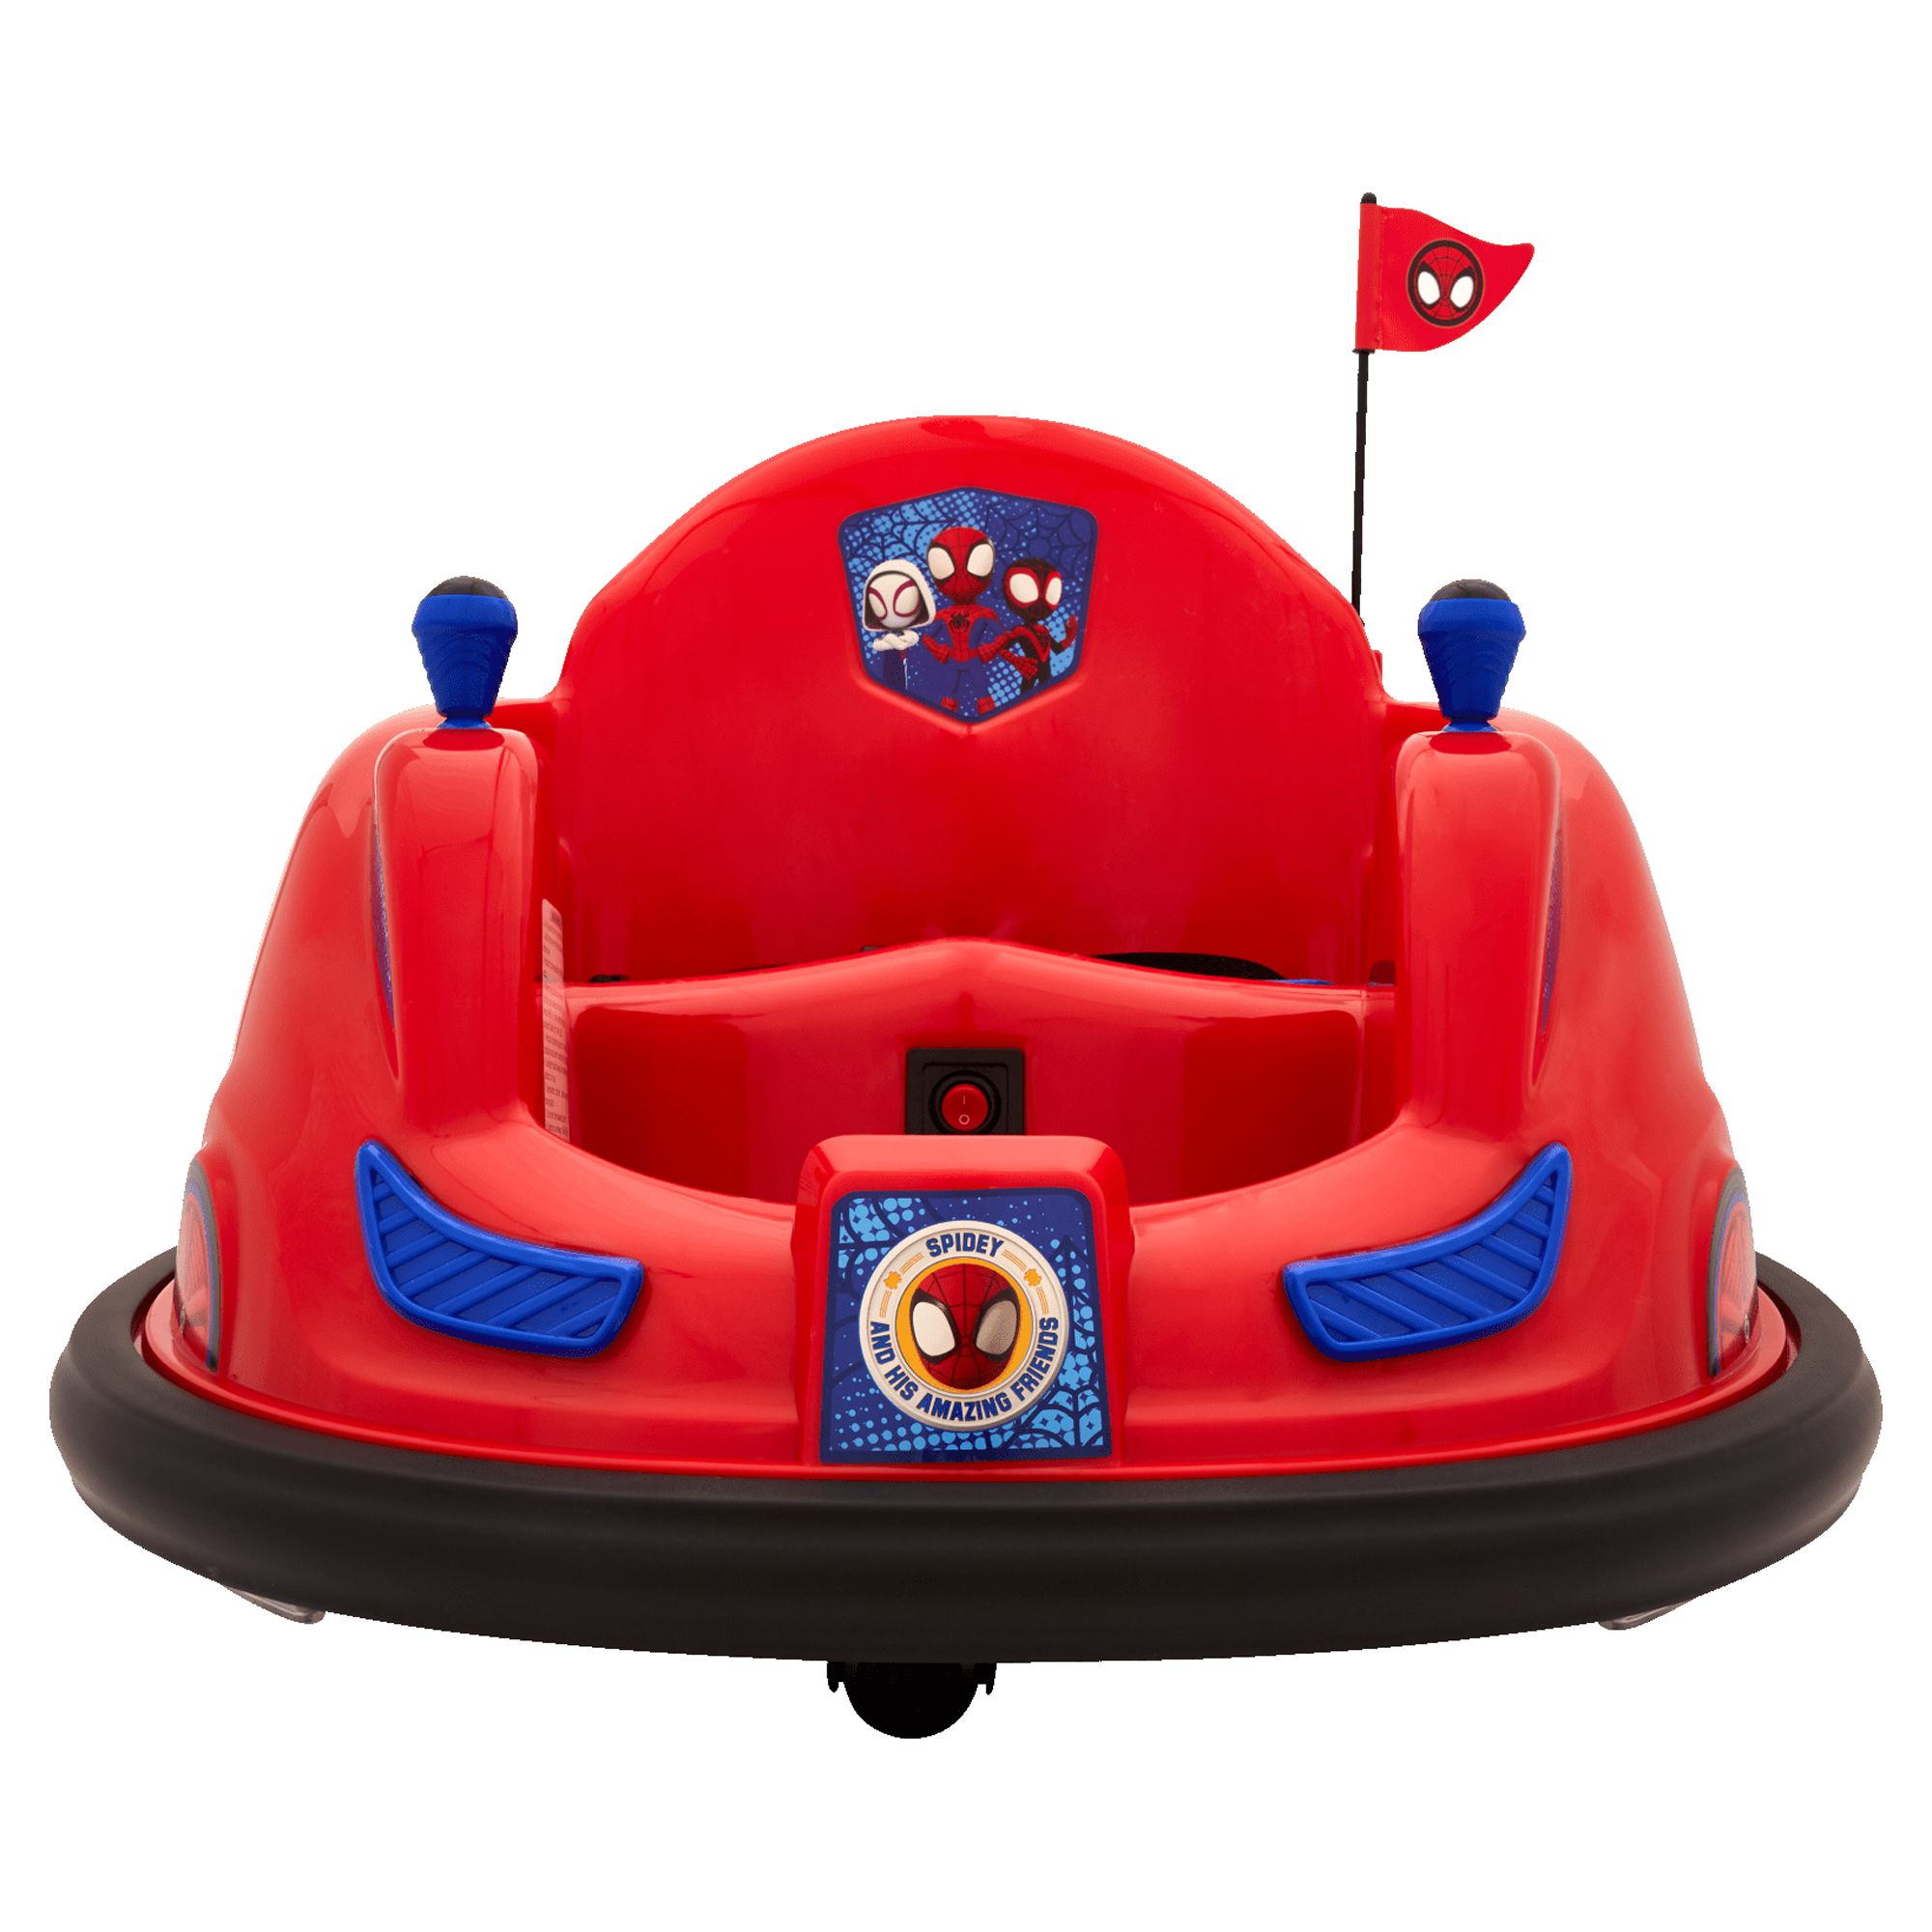 Spidey and His Amazing Friends, 6 Volts Bumper Car, Battery Powered Ride on, Fun LED Lights Includes, Charger, Ages 1.5- 4 Years, Unisex - image 11 of 14